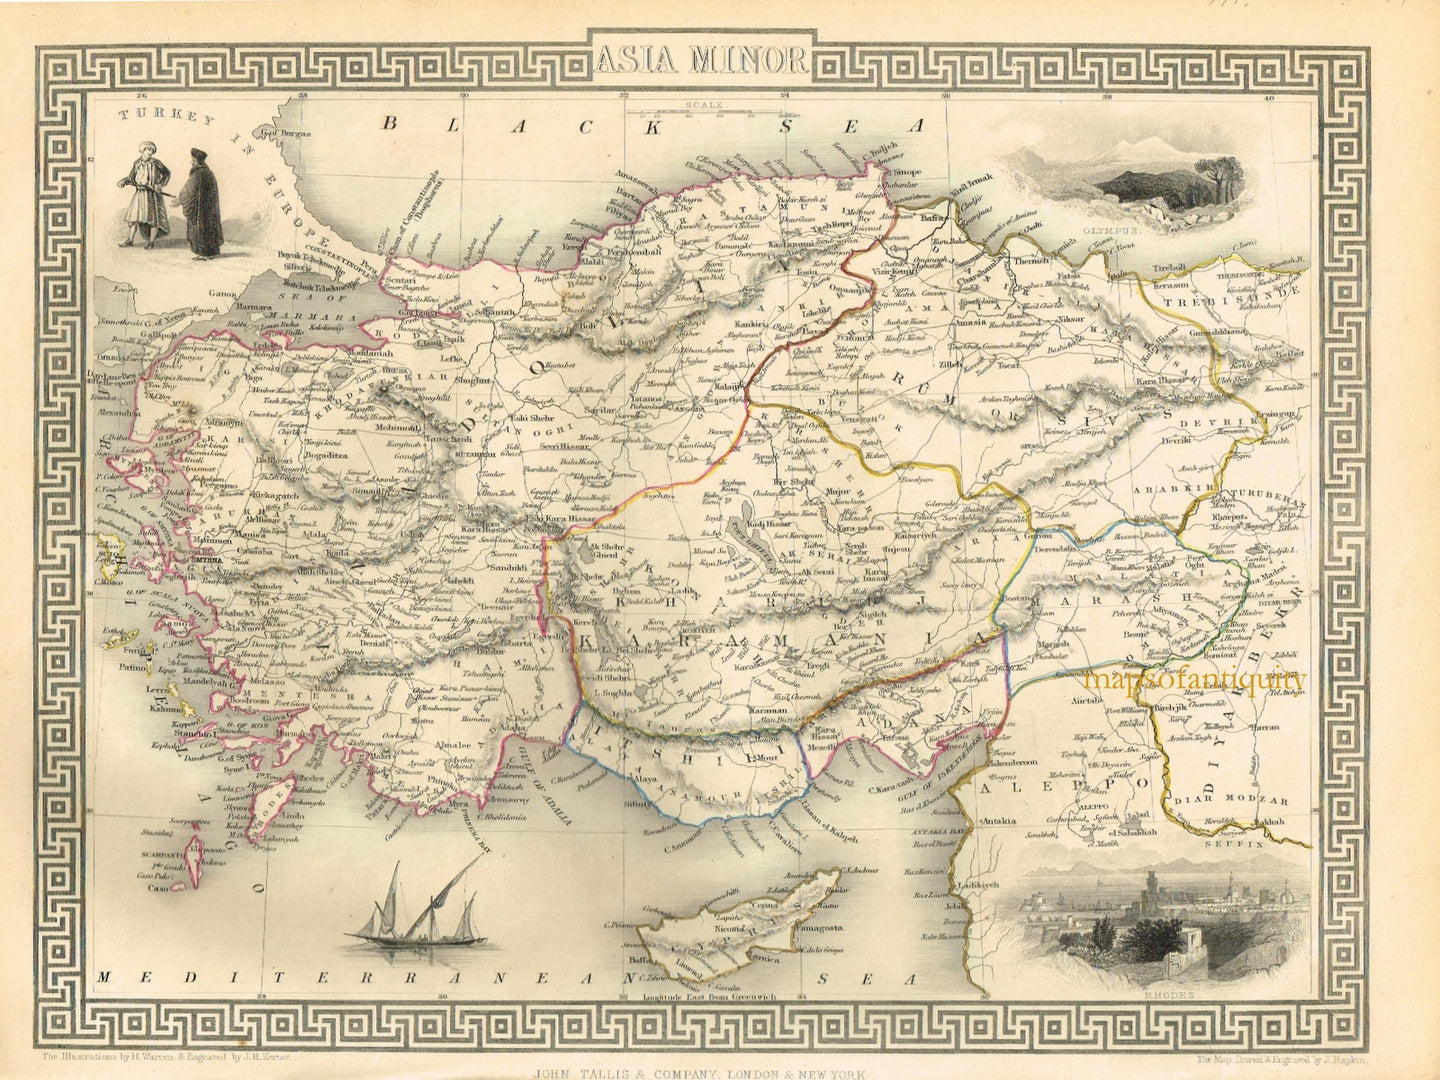 Antique-Hand-Colored-Map-Asia-Minor-Asia--1851-Tallis-Maps-Of-Antiquity